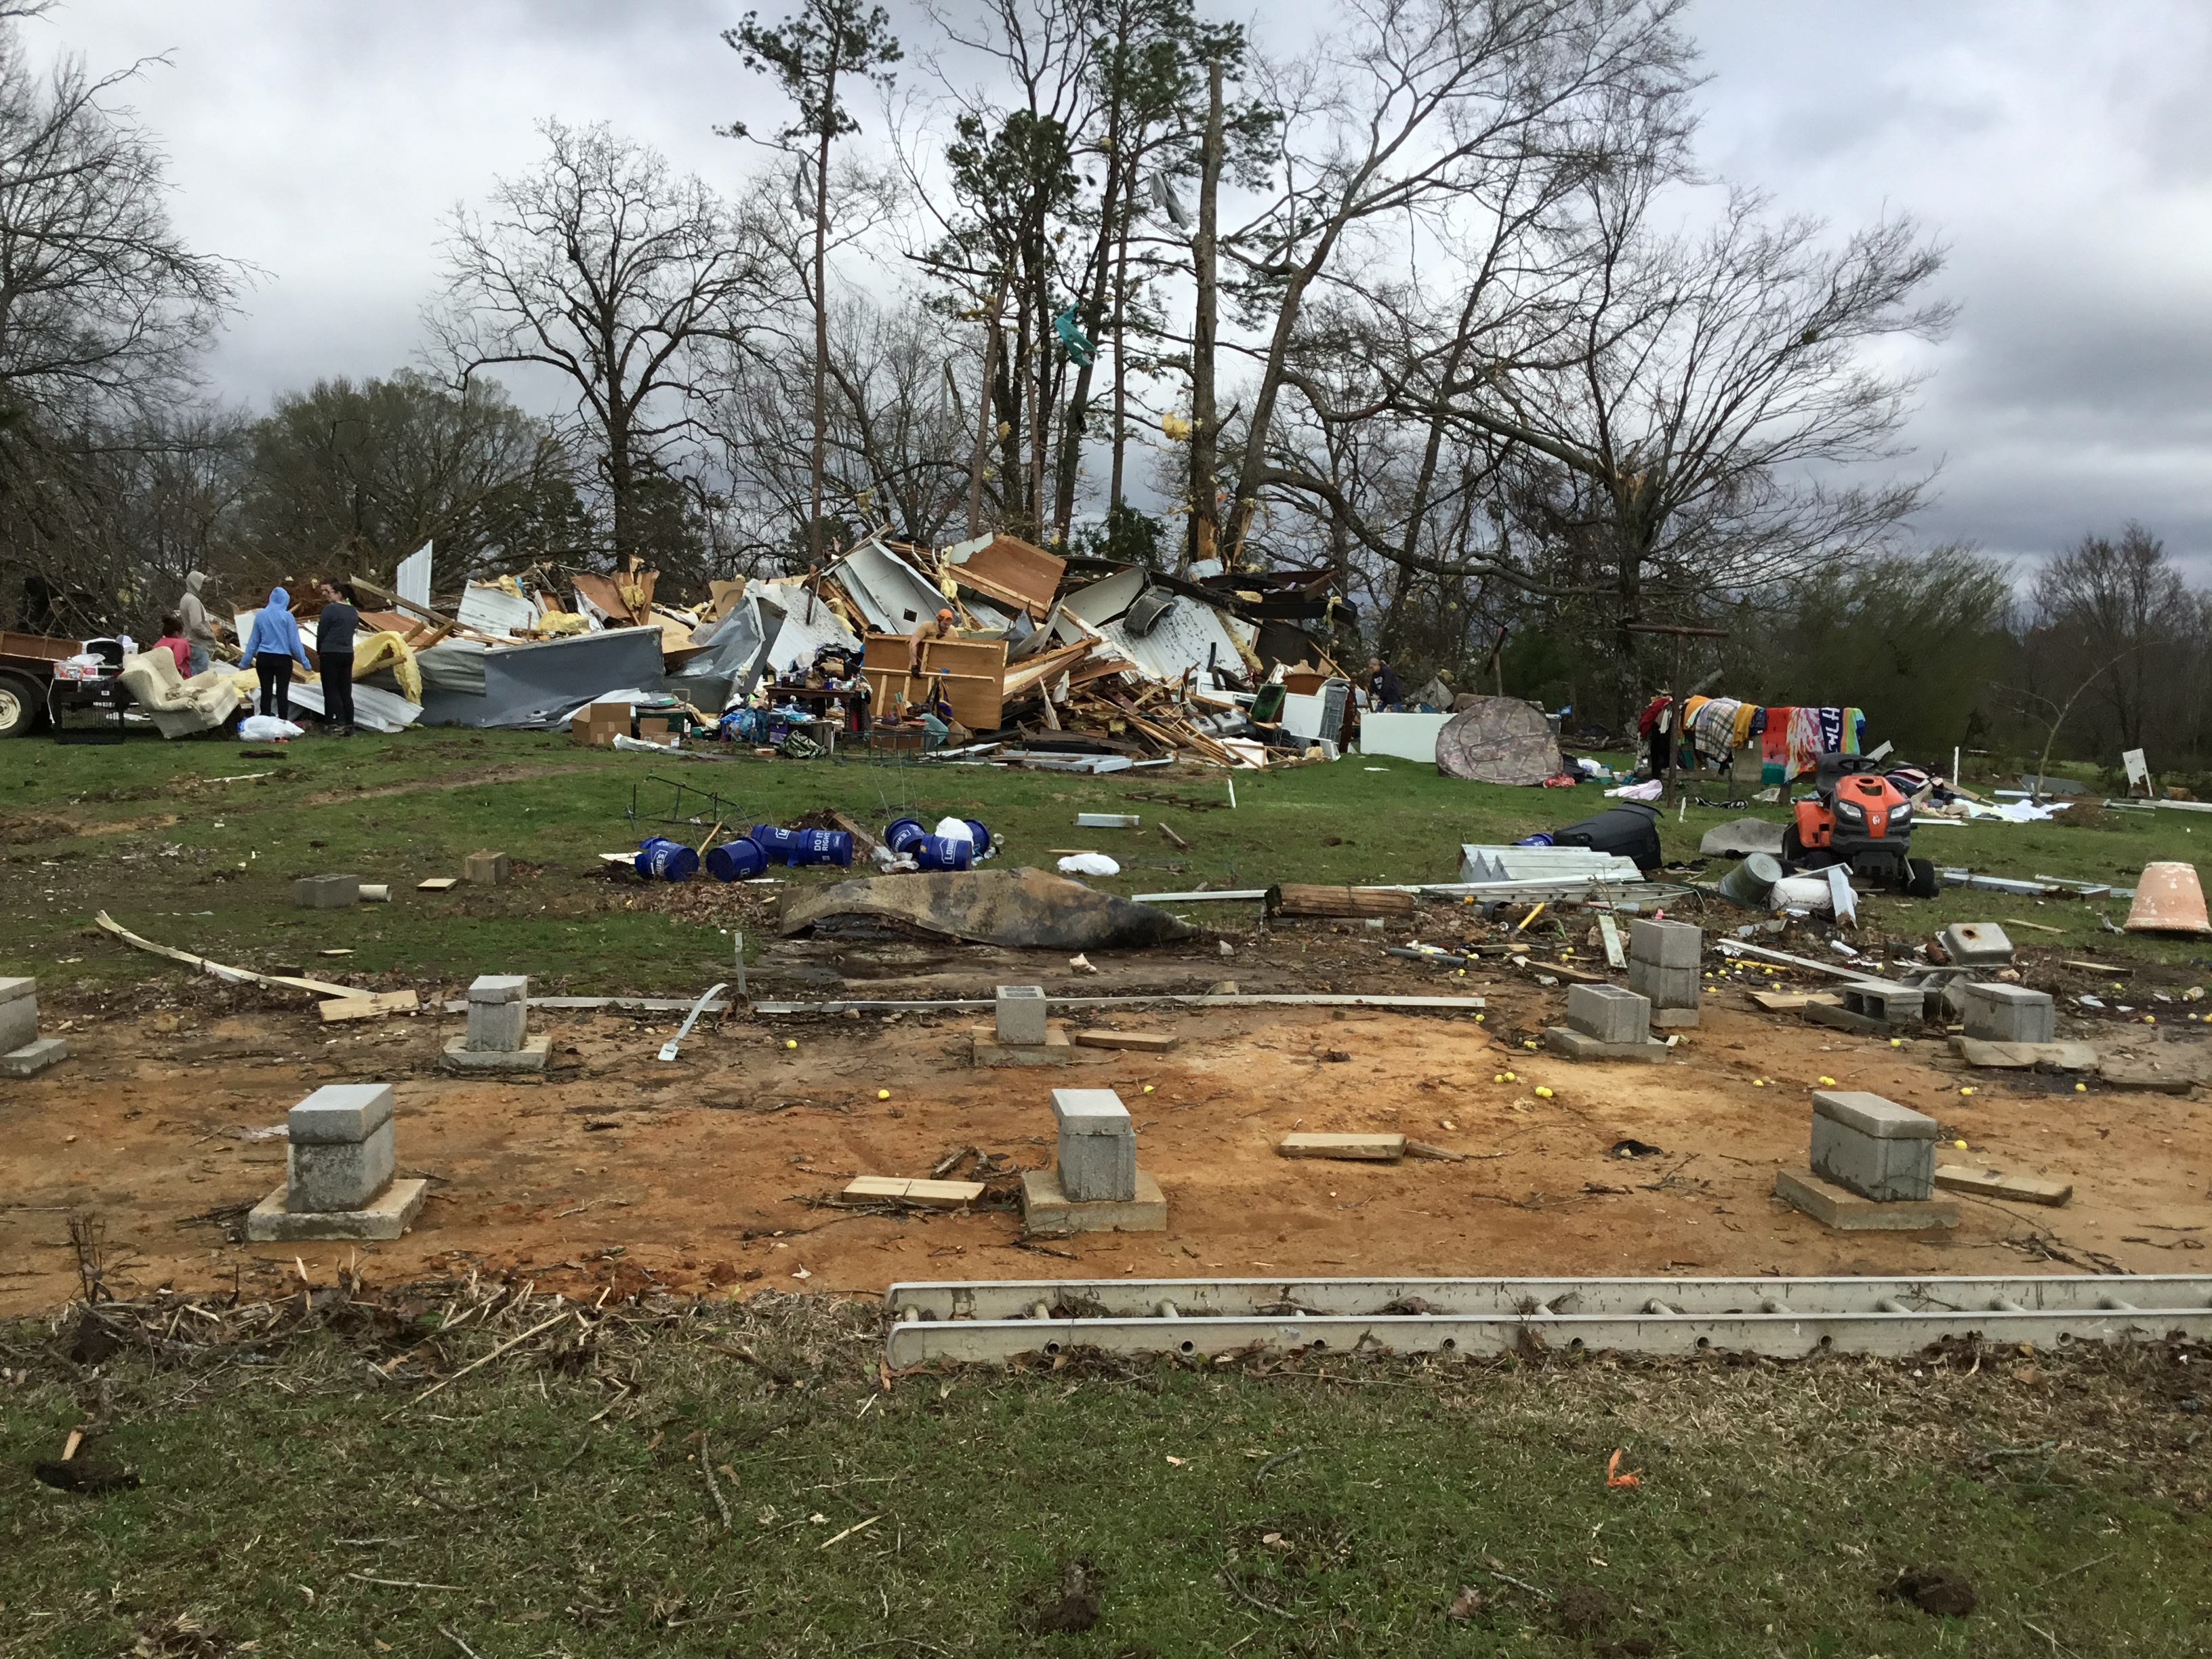 A mobile home that was obliterated by a high-end EF2 tornado near Kirby, Arkansas. Two minor injuries occurred at this location